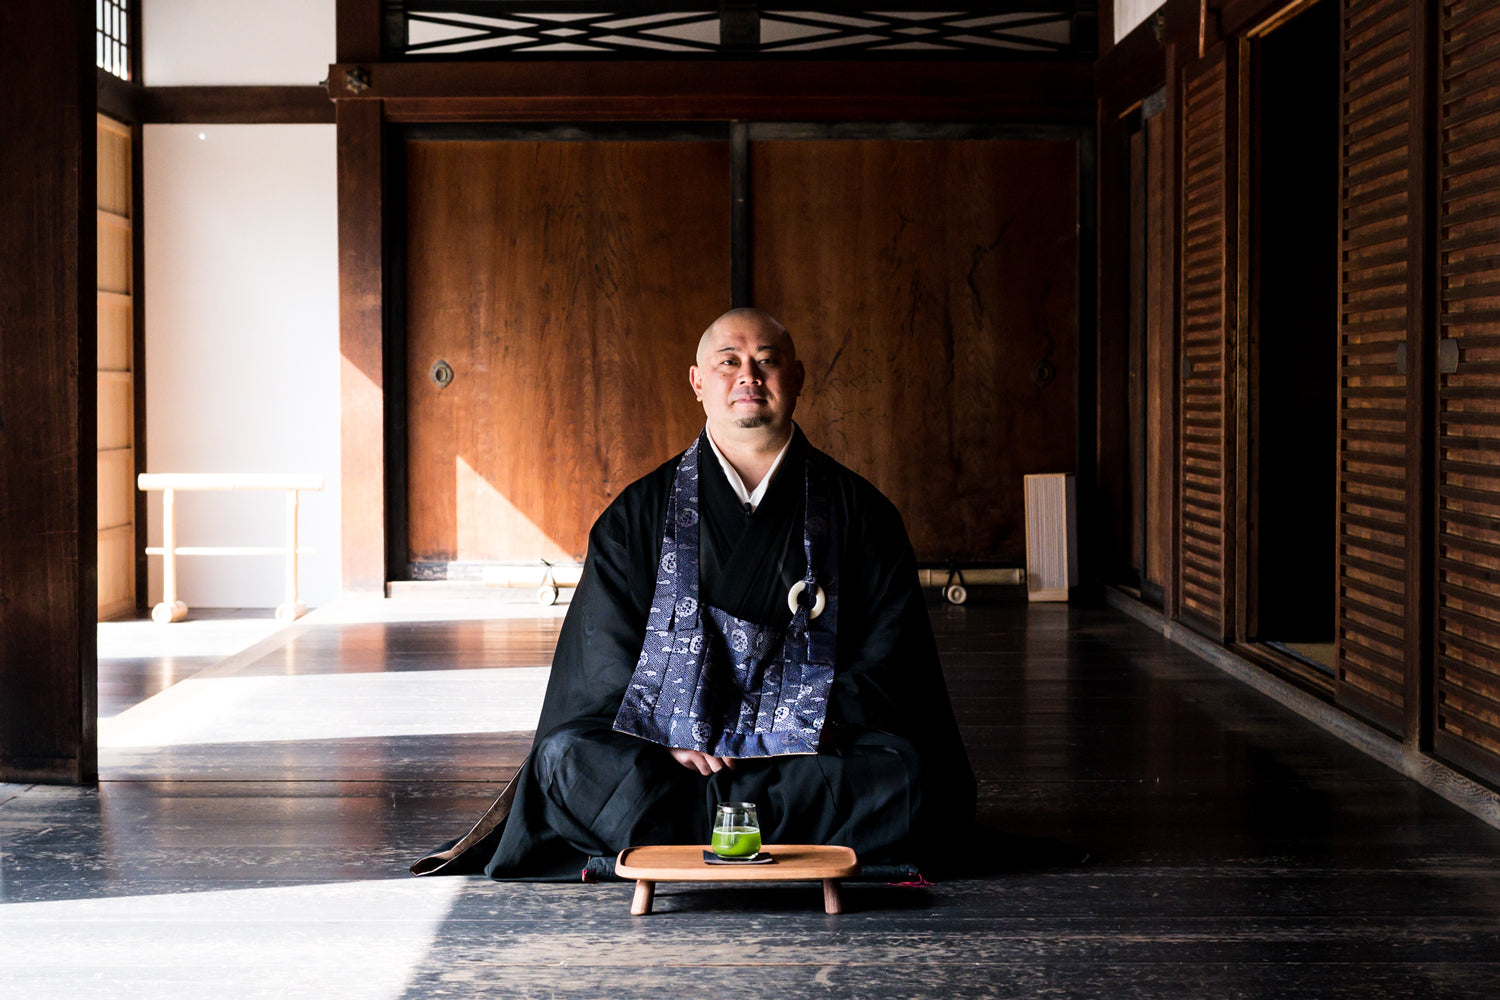 Shunkoin Temple’s Rev. Takafumi sitting in front of a sparkling matcha in an empty room with natural light.